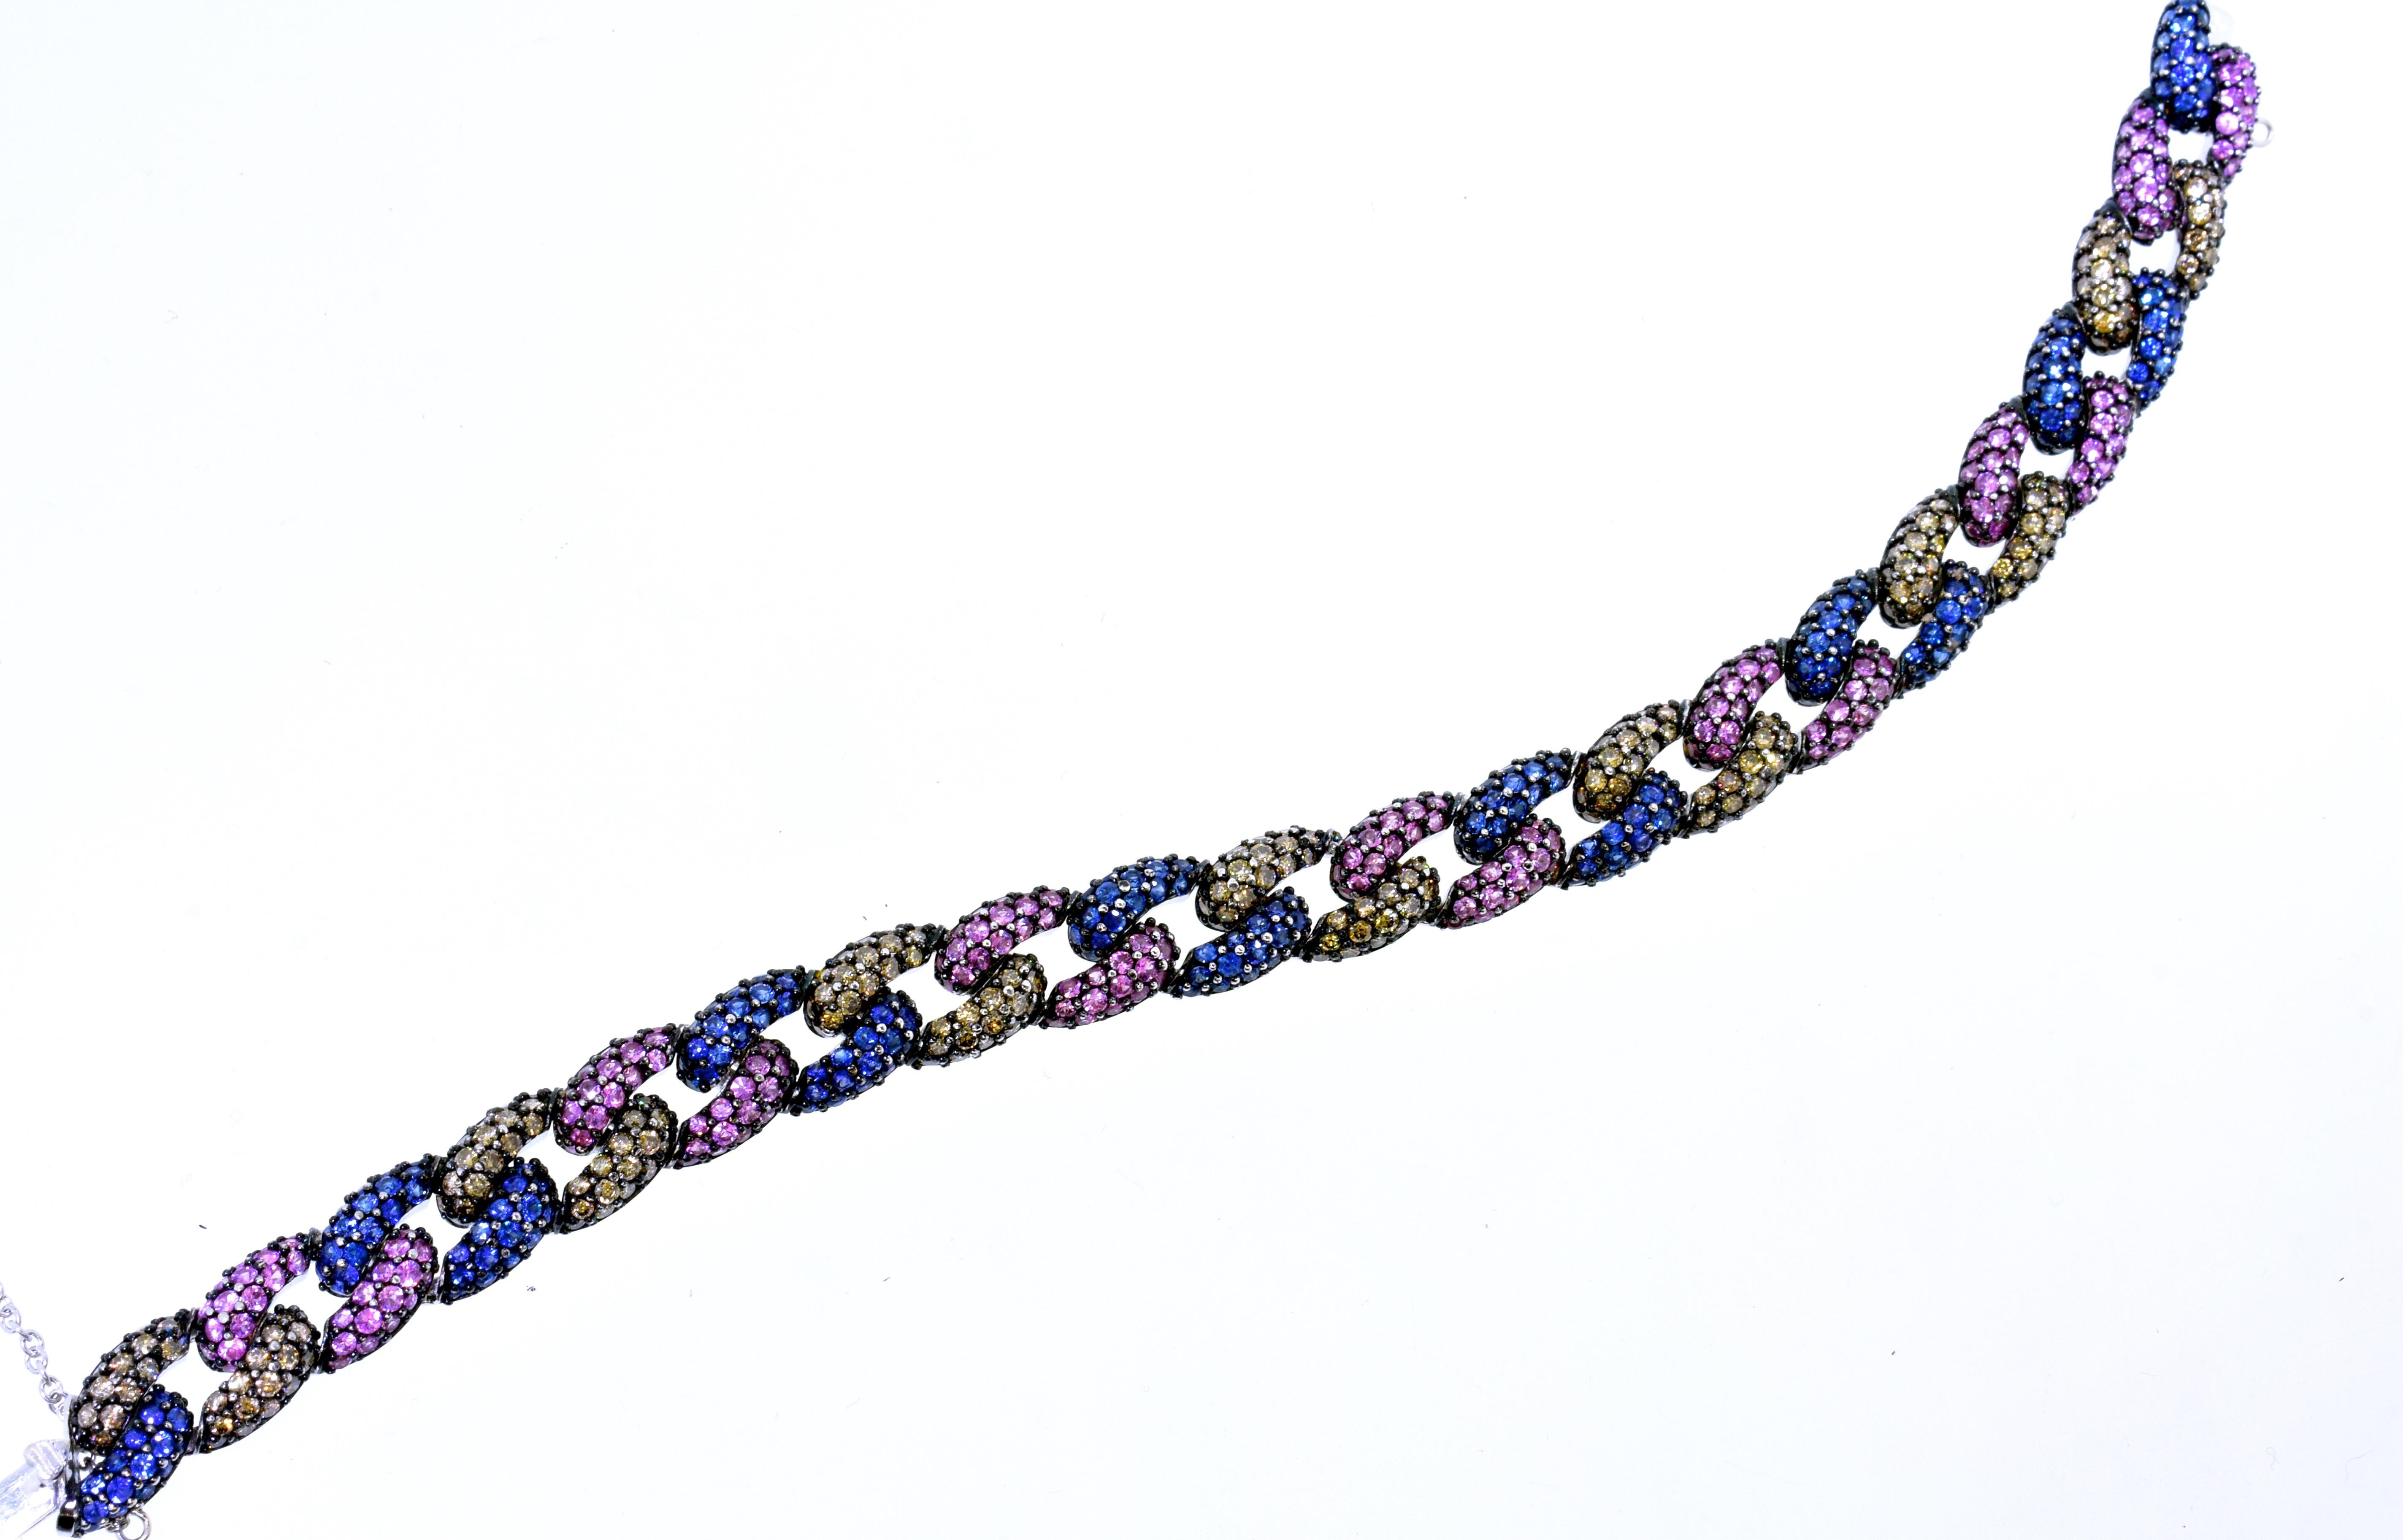 Sapphires, both blue and pink, and champagne colored diamonds are set in a contemporary link bracelet.  There are 250 bead set brilliant cut natural blue sapphires weighing an estimated total of 5.0 cts.  There is  250 natural pink sapphires also